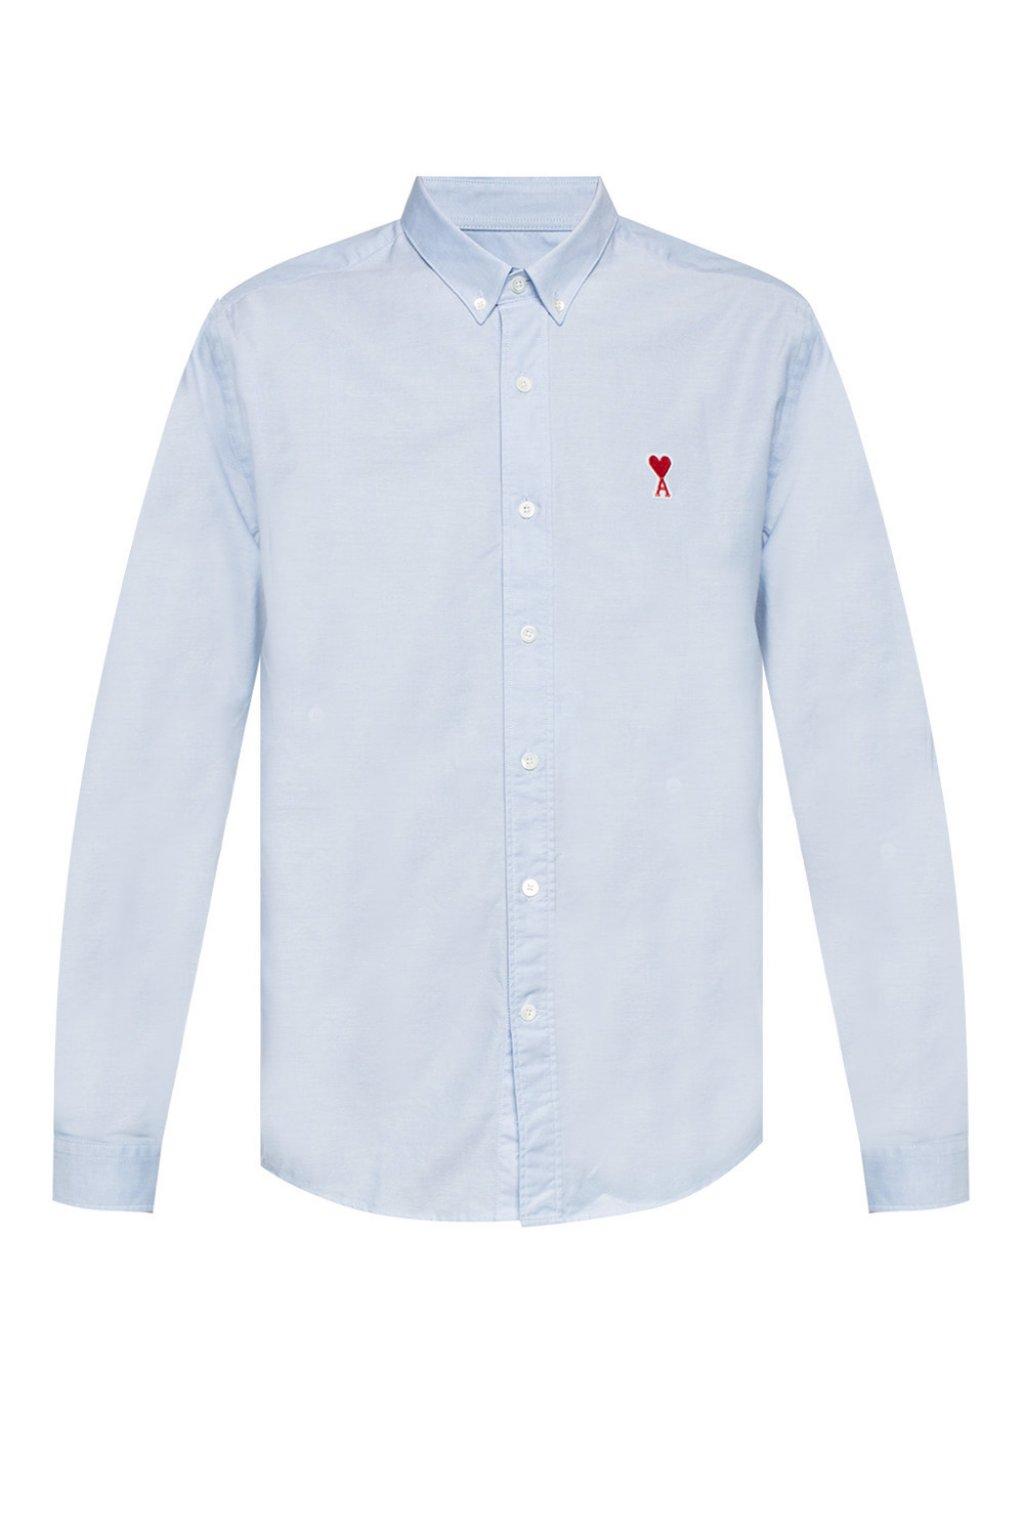 AMI Cotton Logo-embroidered Shirt in Light Blue (Blue) for Men - Lyst